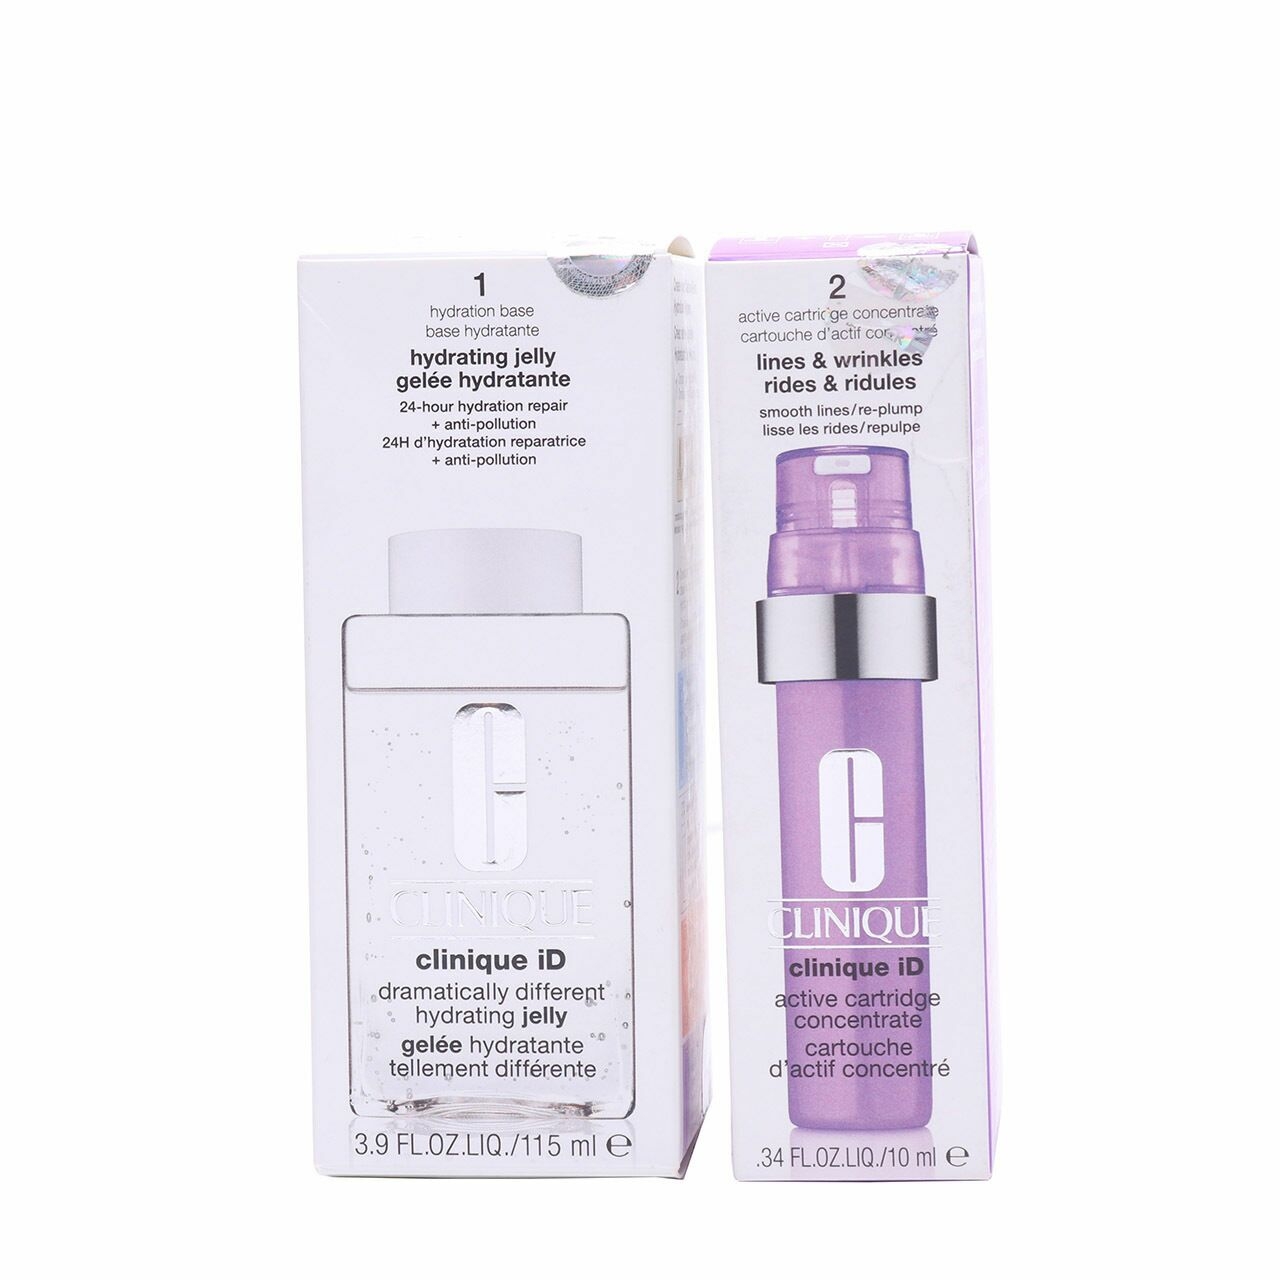 Clinique Dramatically Different Hydranting Jelly Skin Care